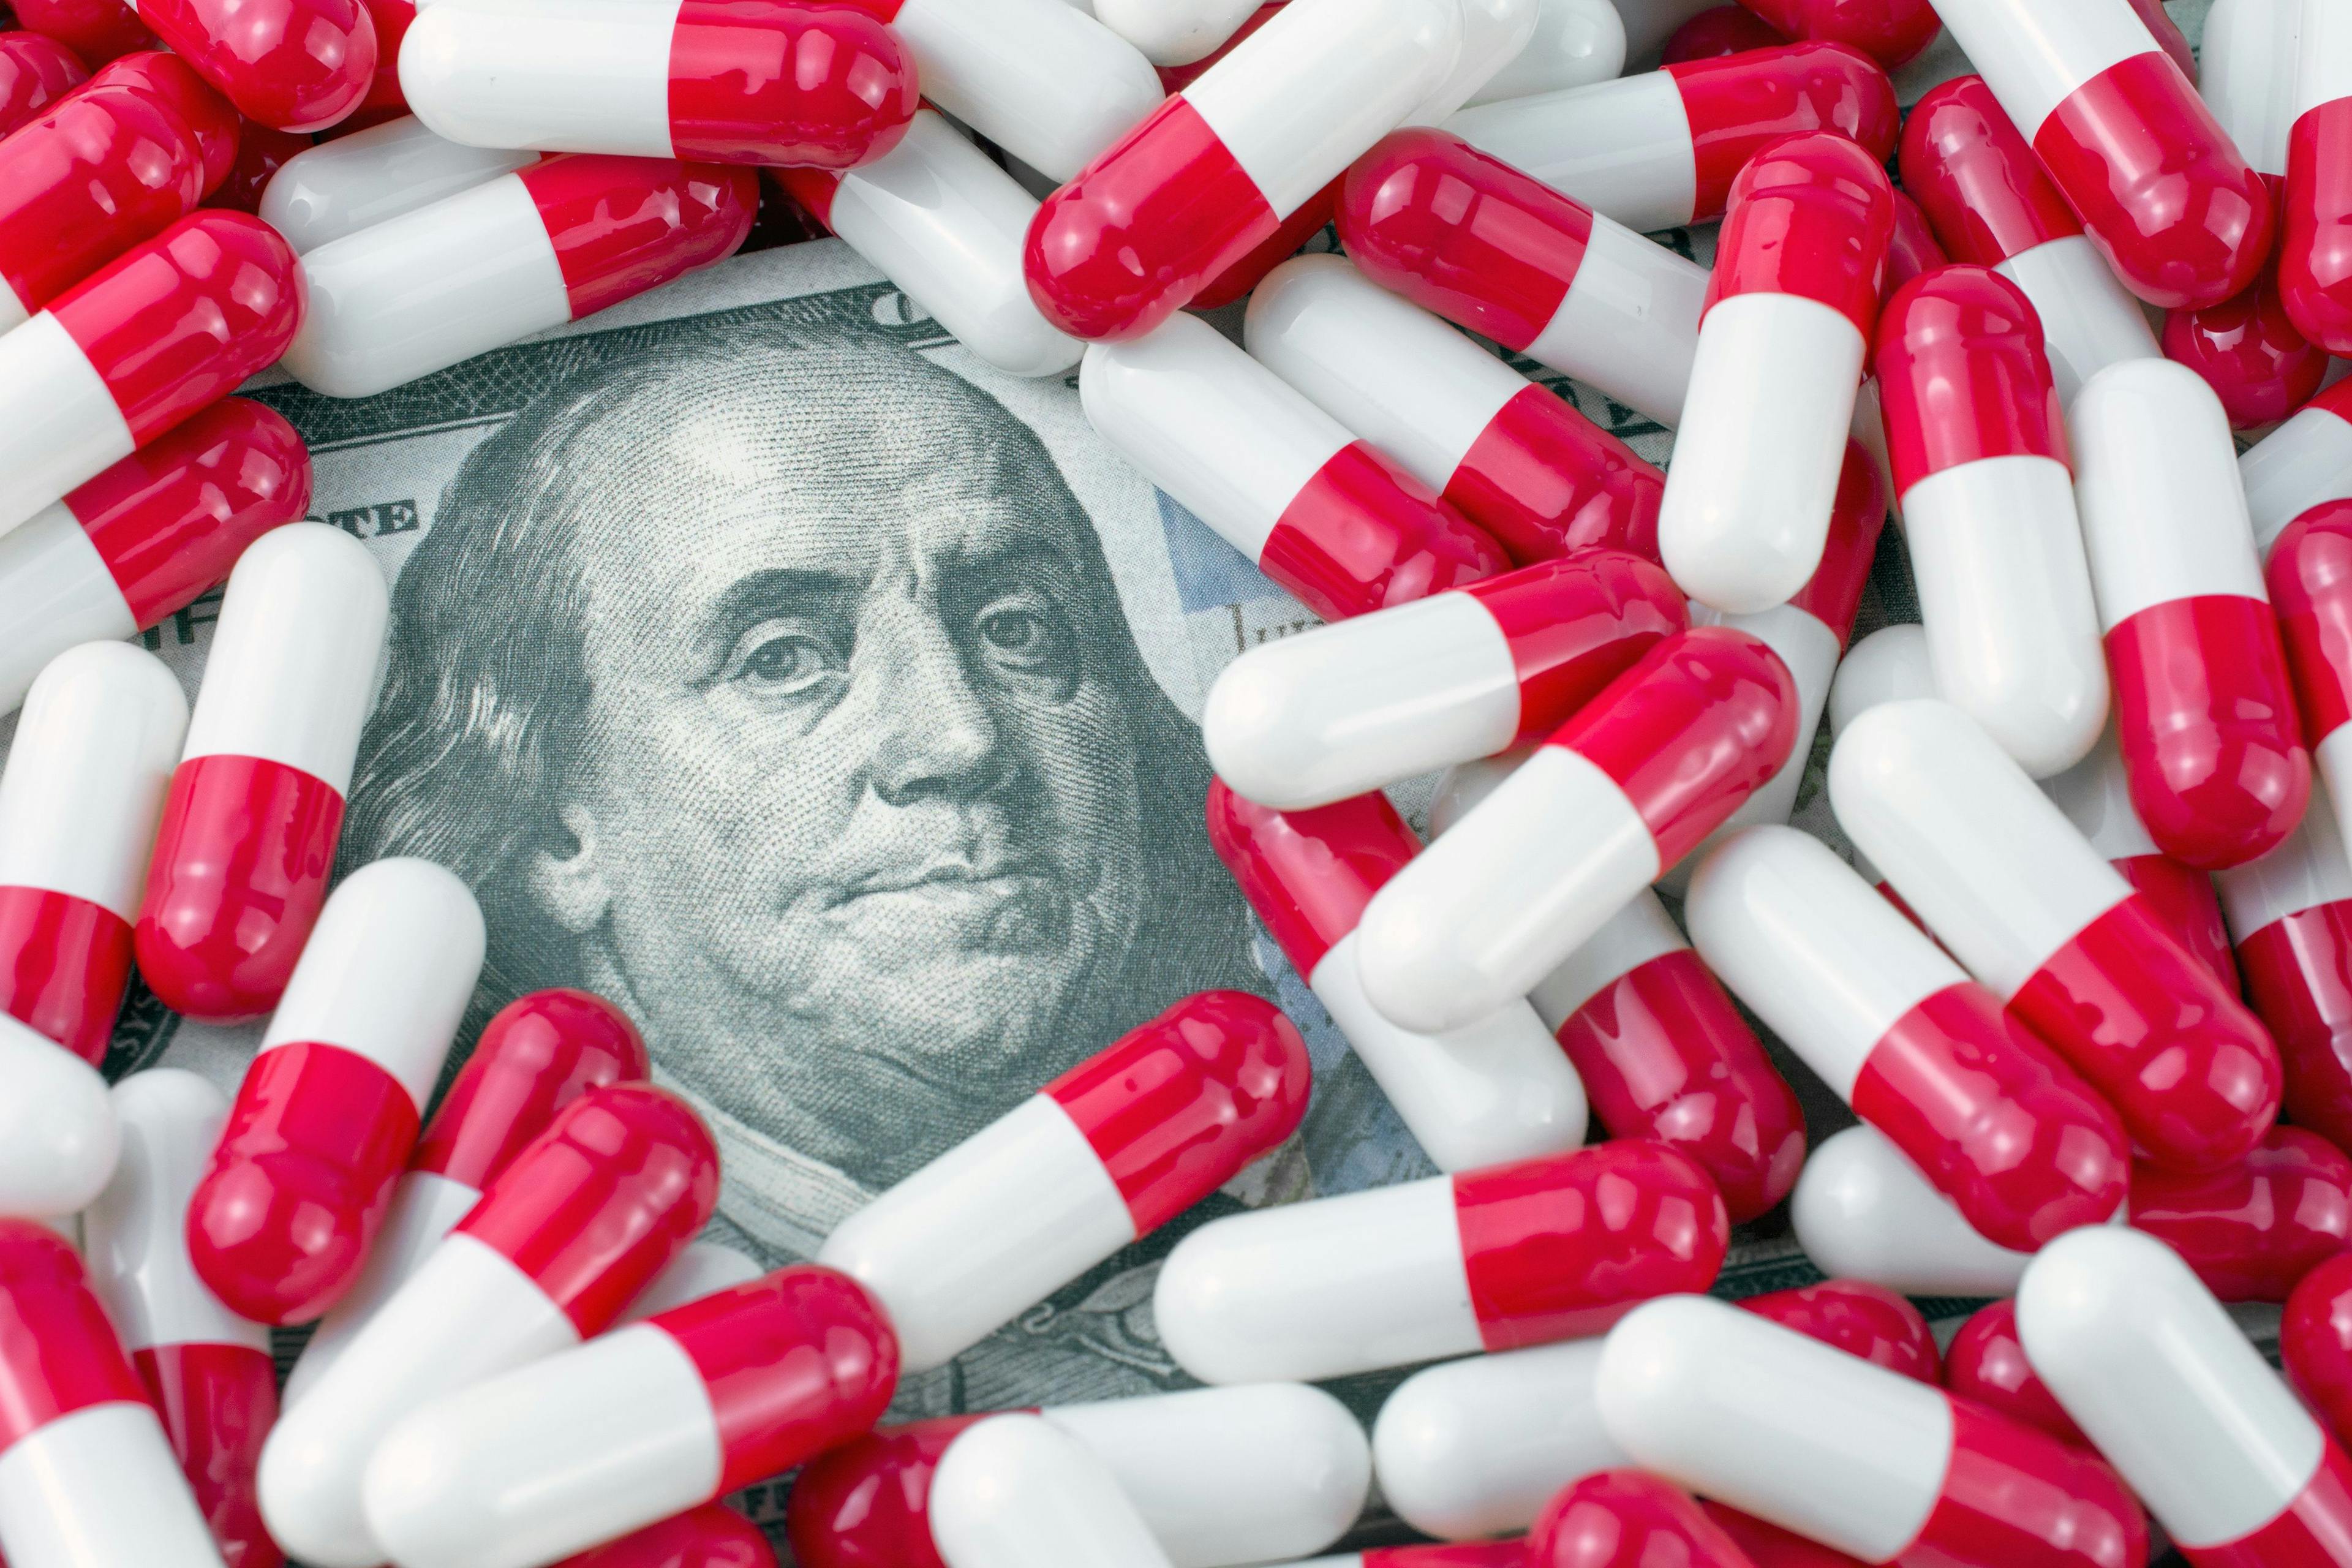 Study: Physicians usually wrong when estimating patients’ out-of-pocket drug costs